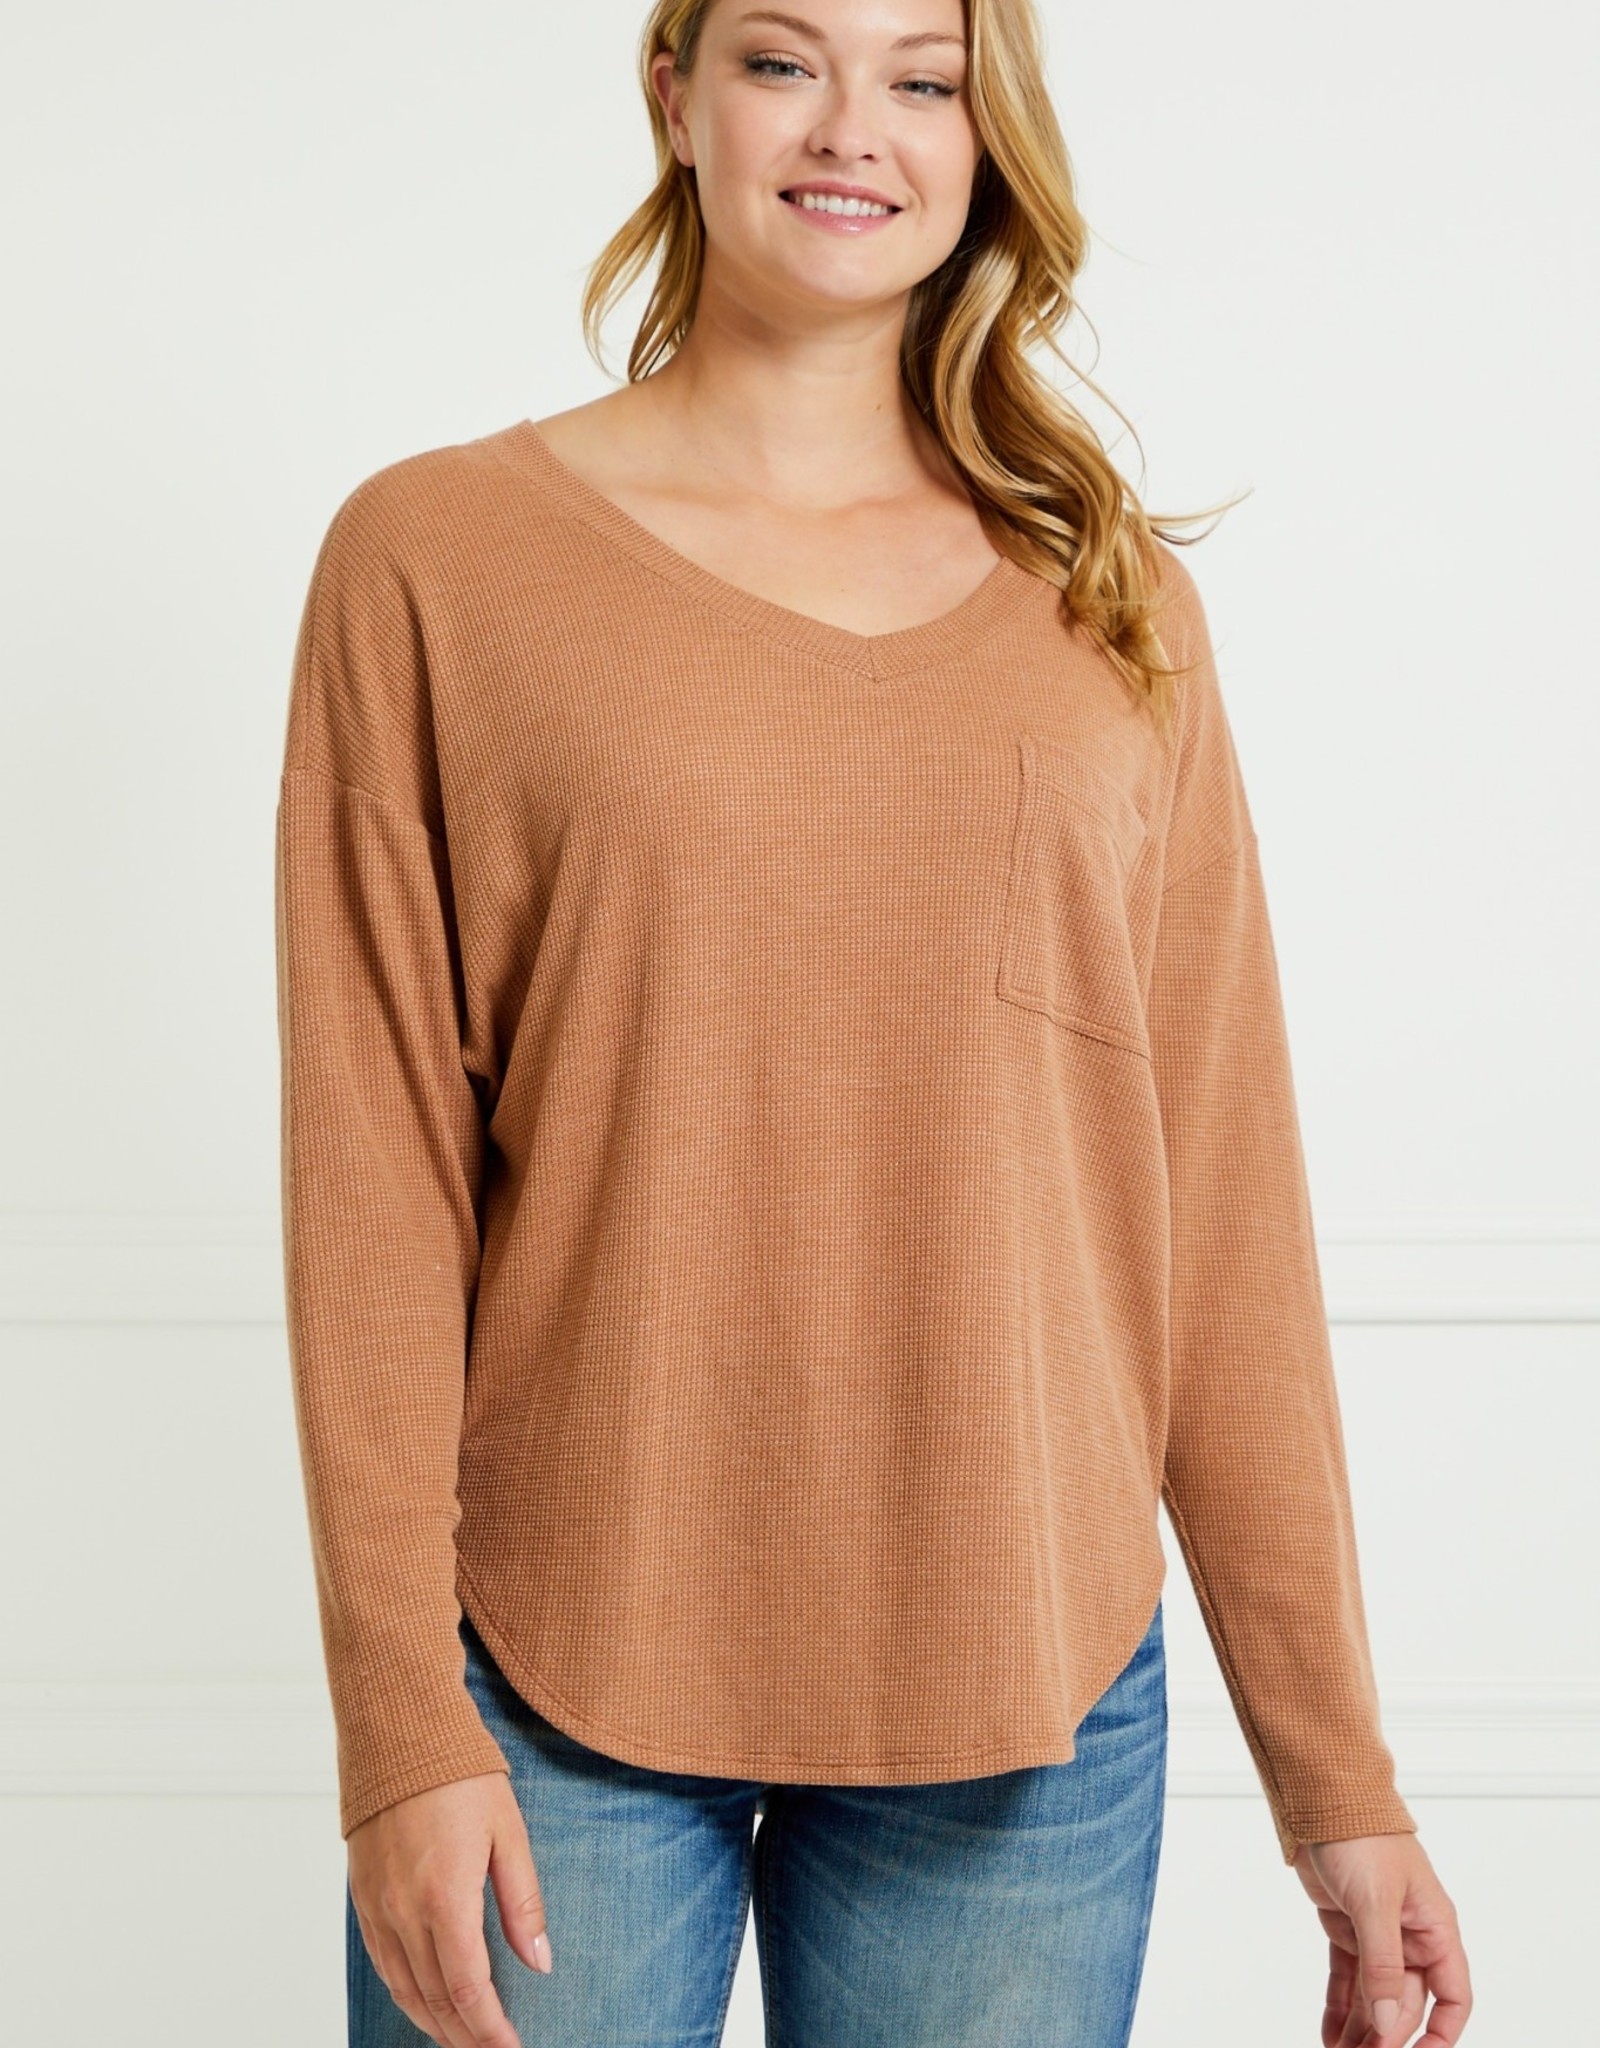 Miss Bliss LS V Neck Sweater Top- Camel